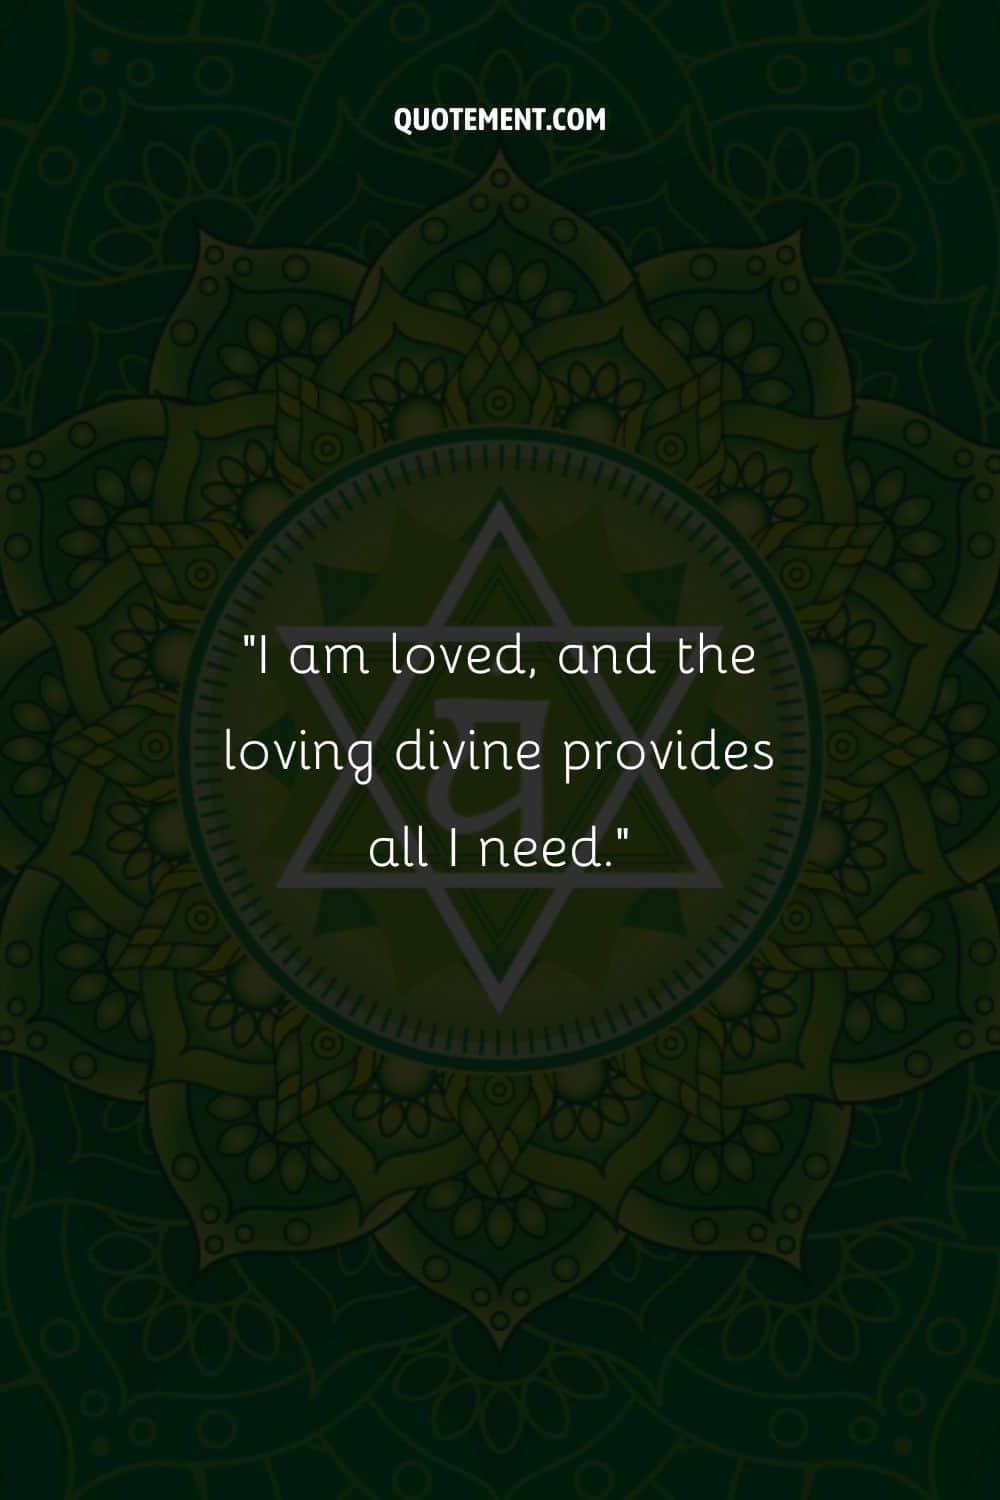 I am loved, and the loving divine provides all I need